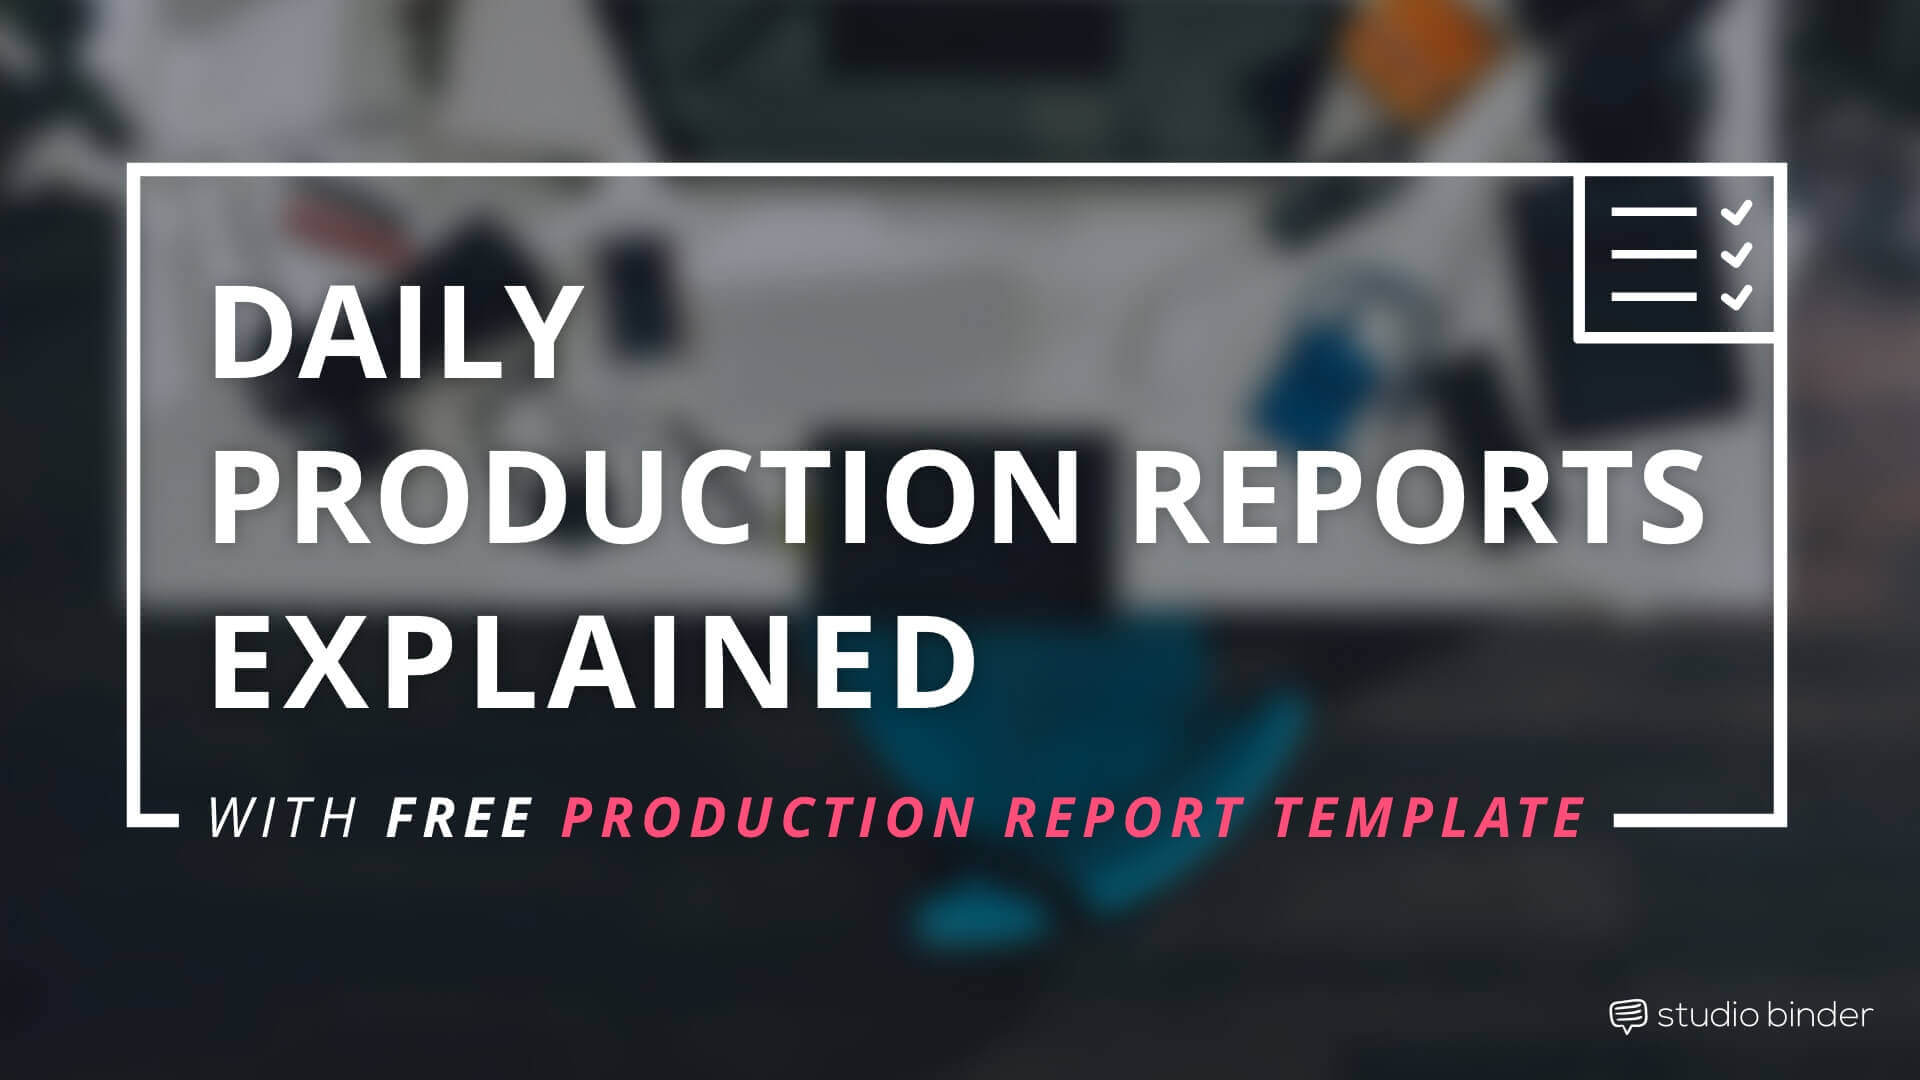 The Daily Production Report Explained with FREE Daily Production Report Template - StudioBinder - Featured